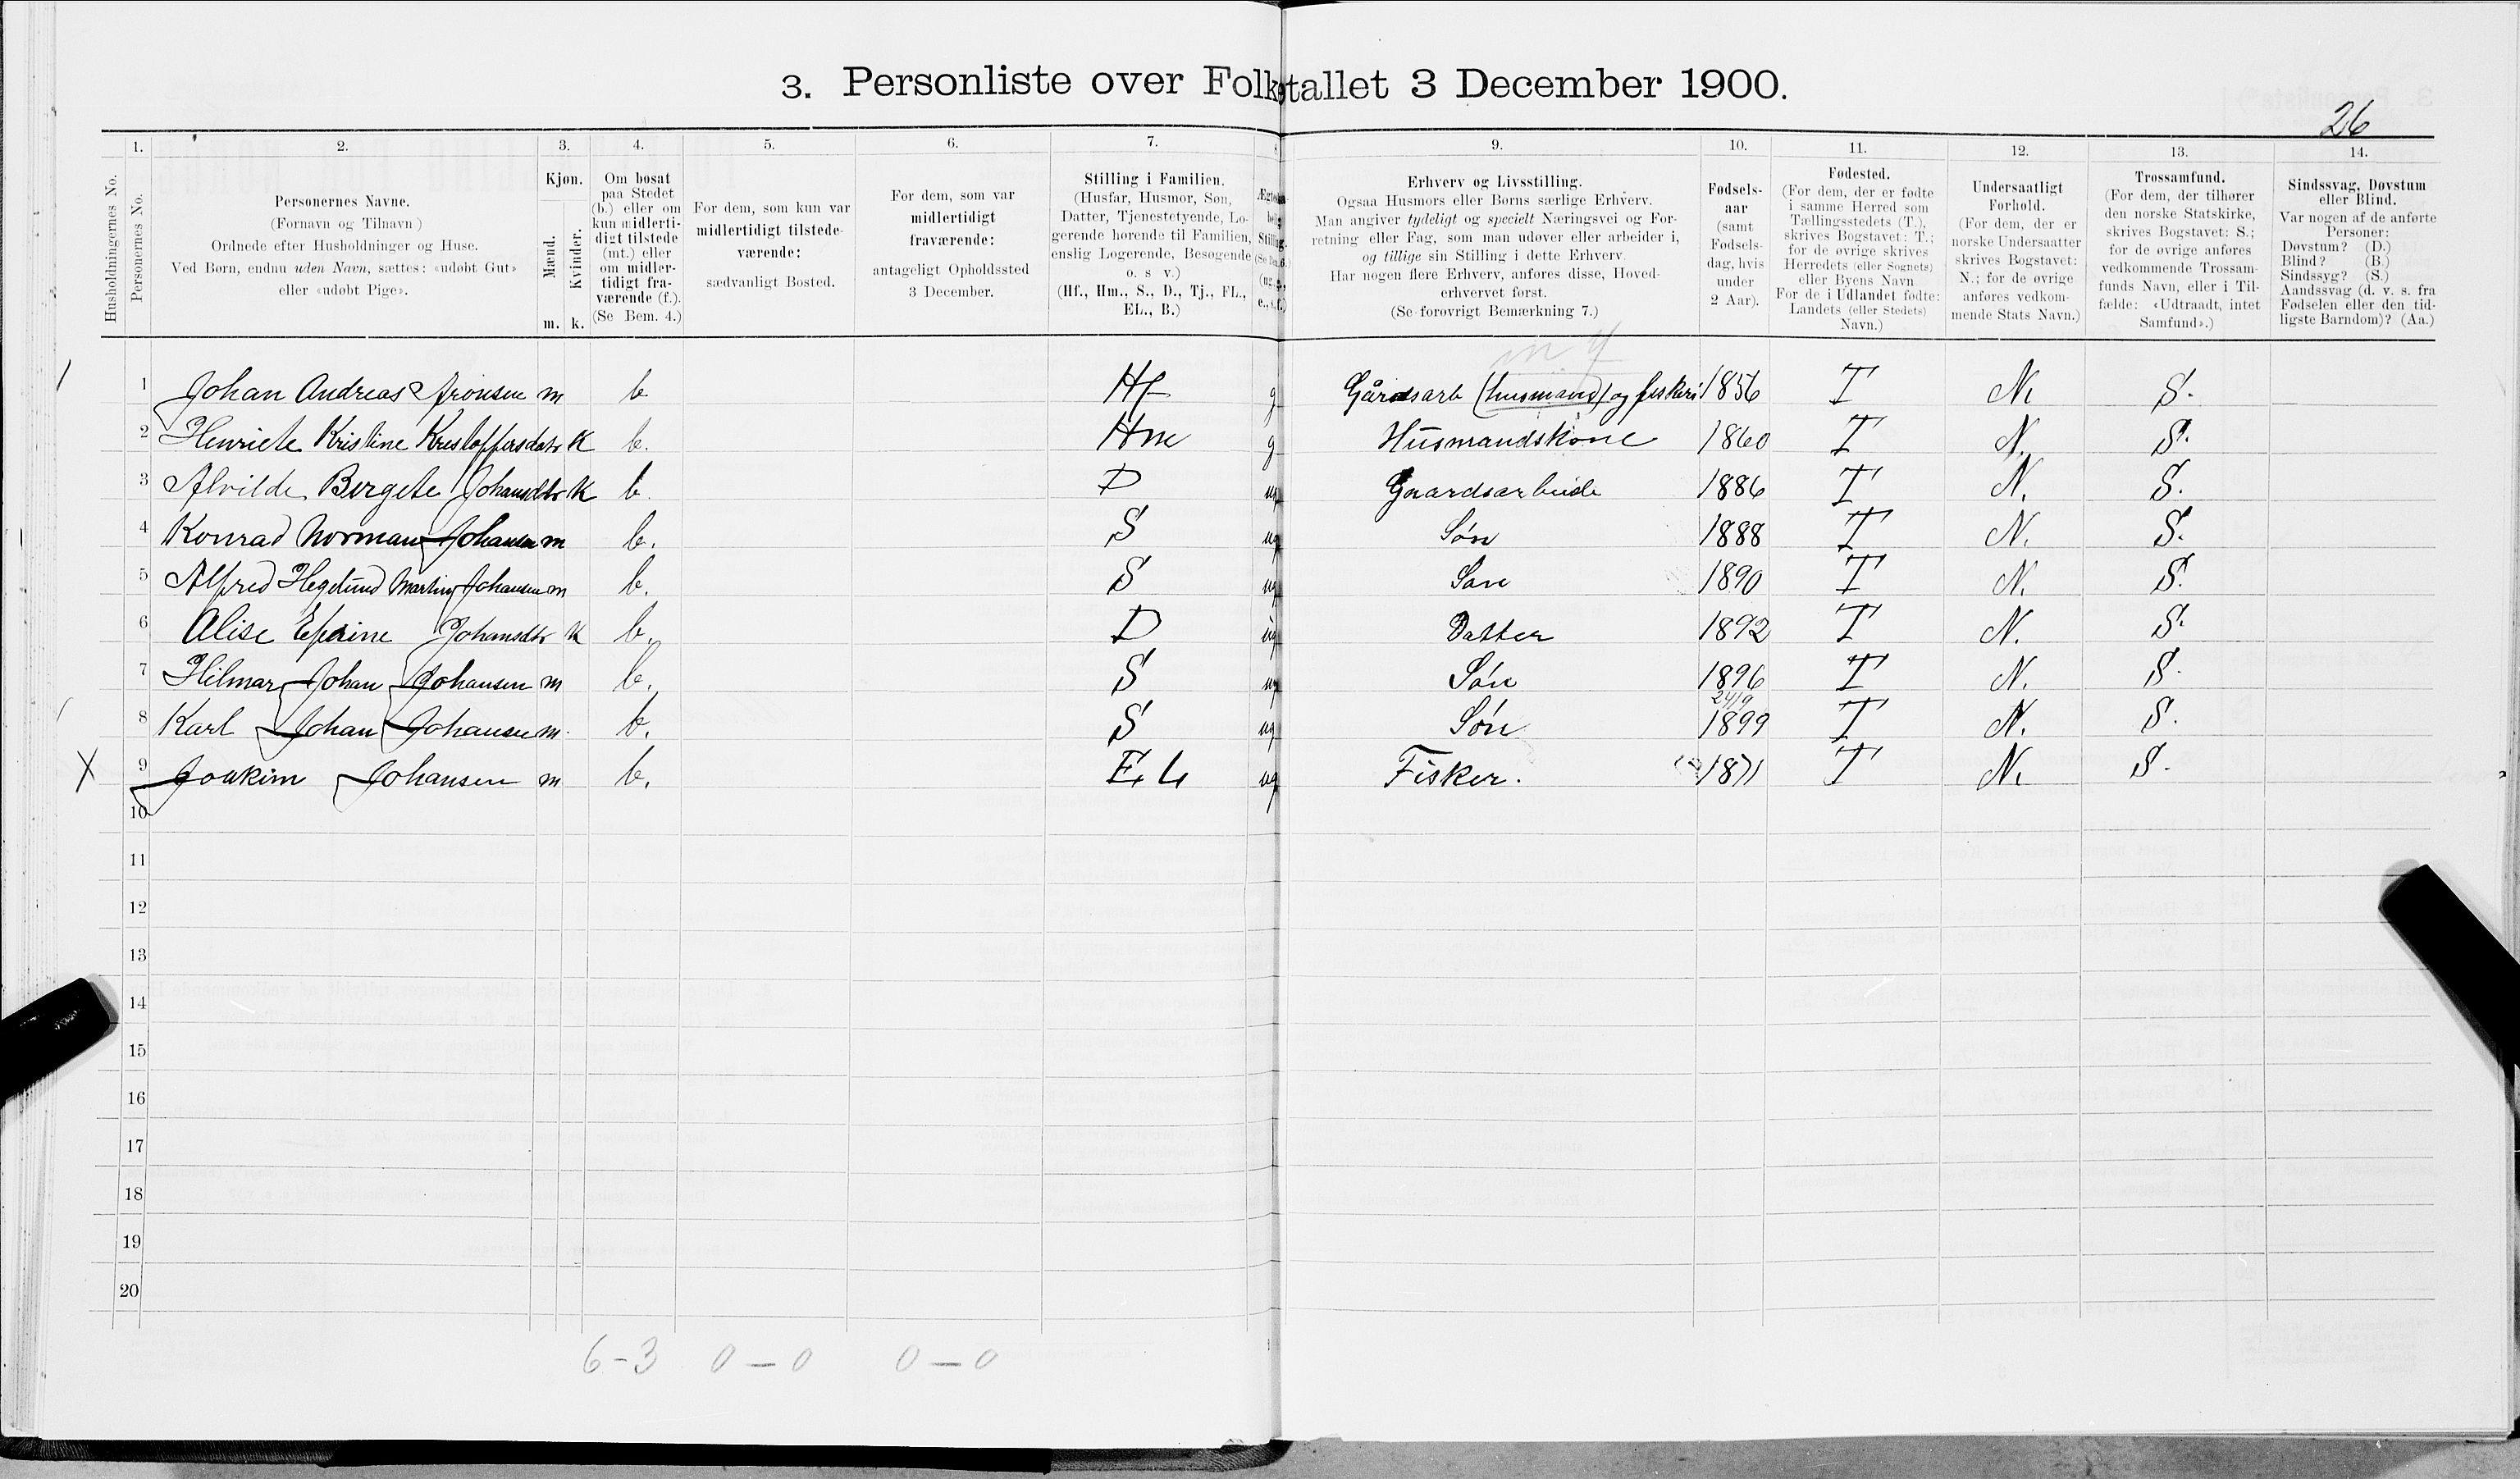 SAT, 1900 census for Hamarøy, 1900, p. 515